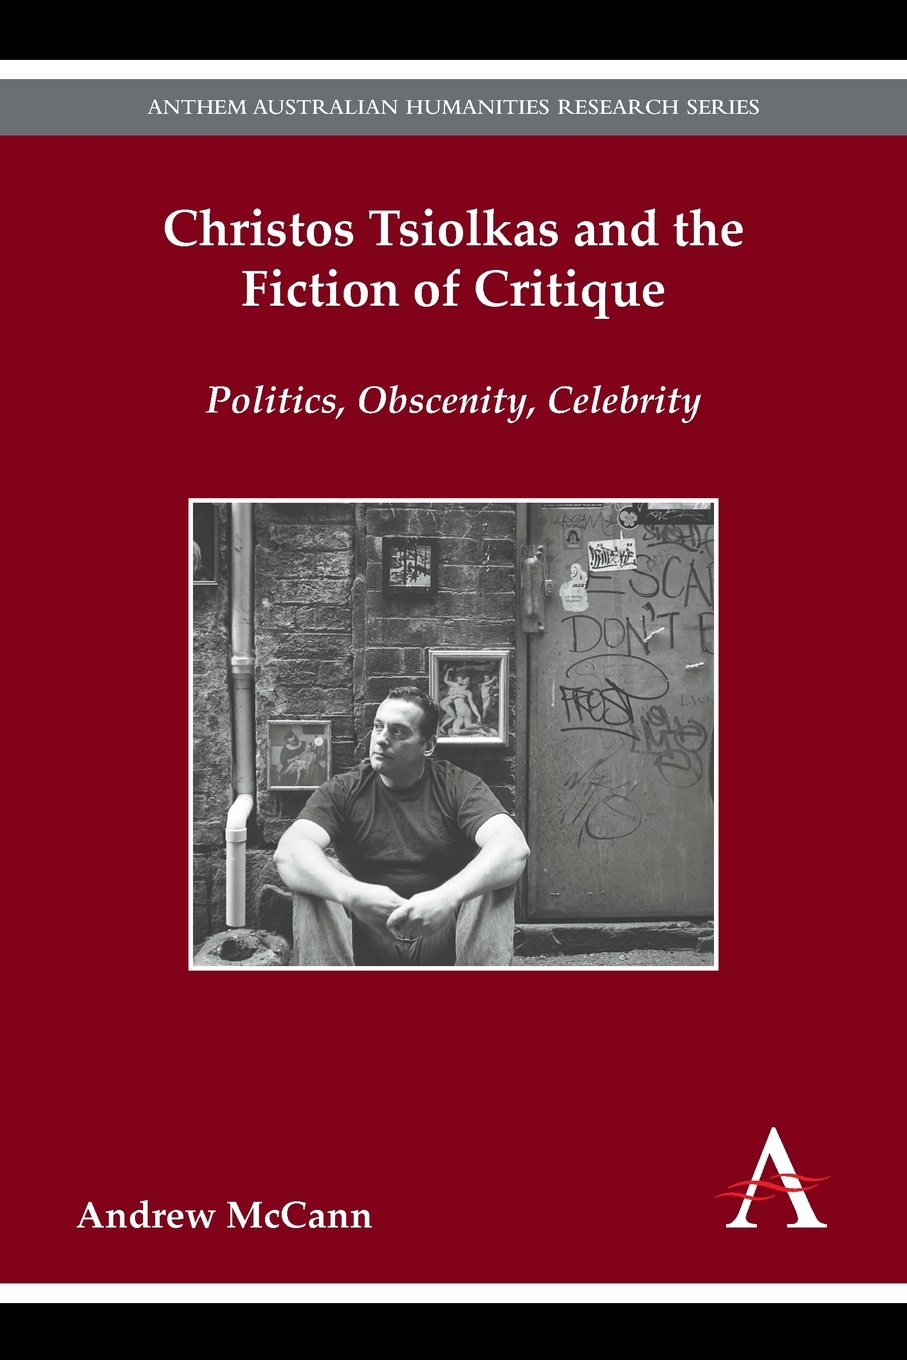 Christos Tsiolkas and the Fiction of Critique. Politics, Obscenity, Celebrity